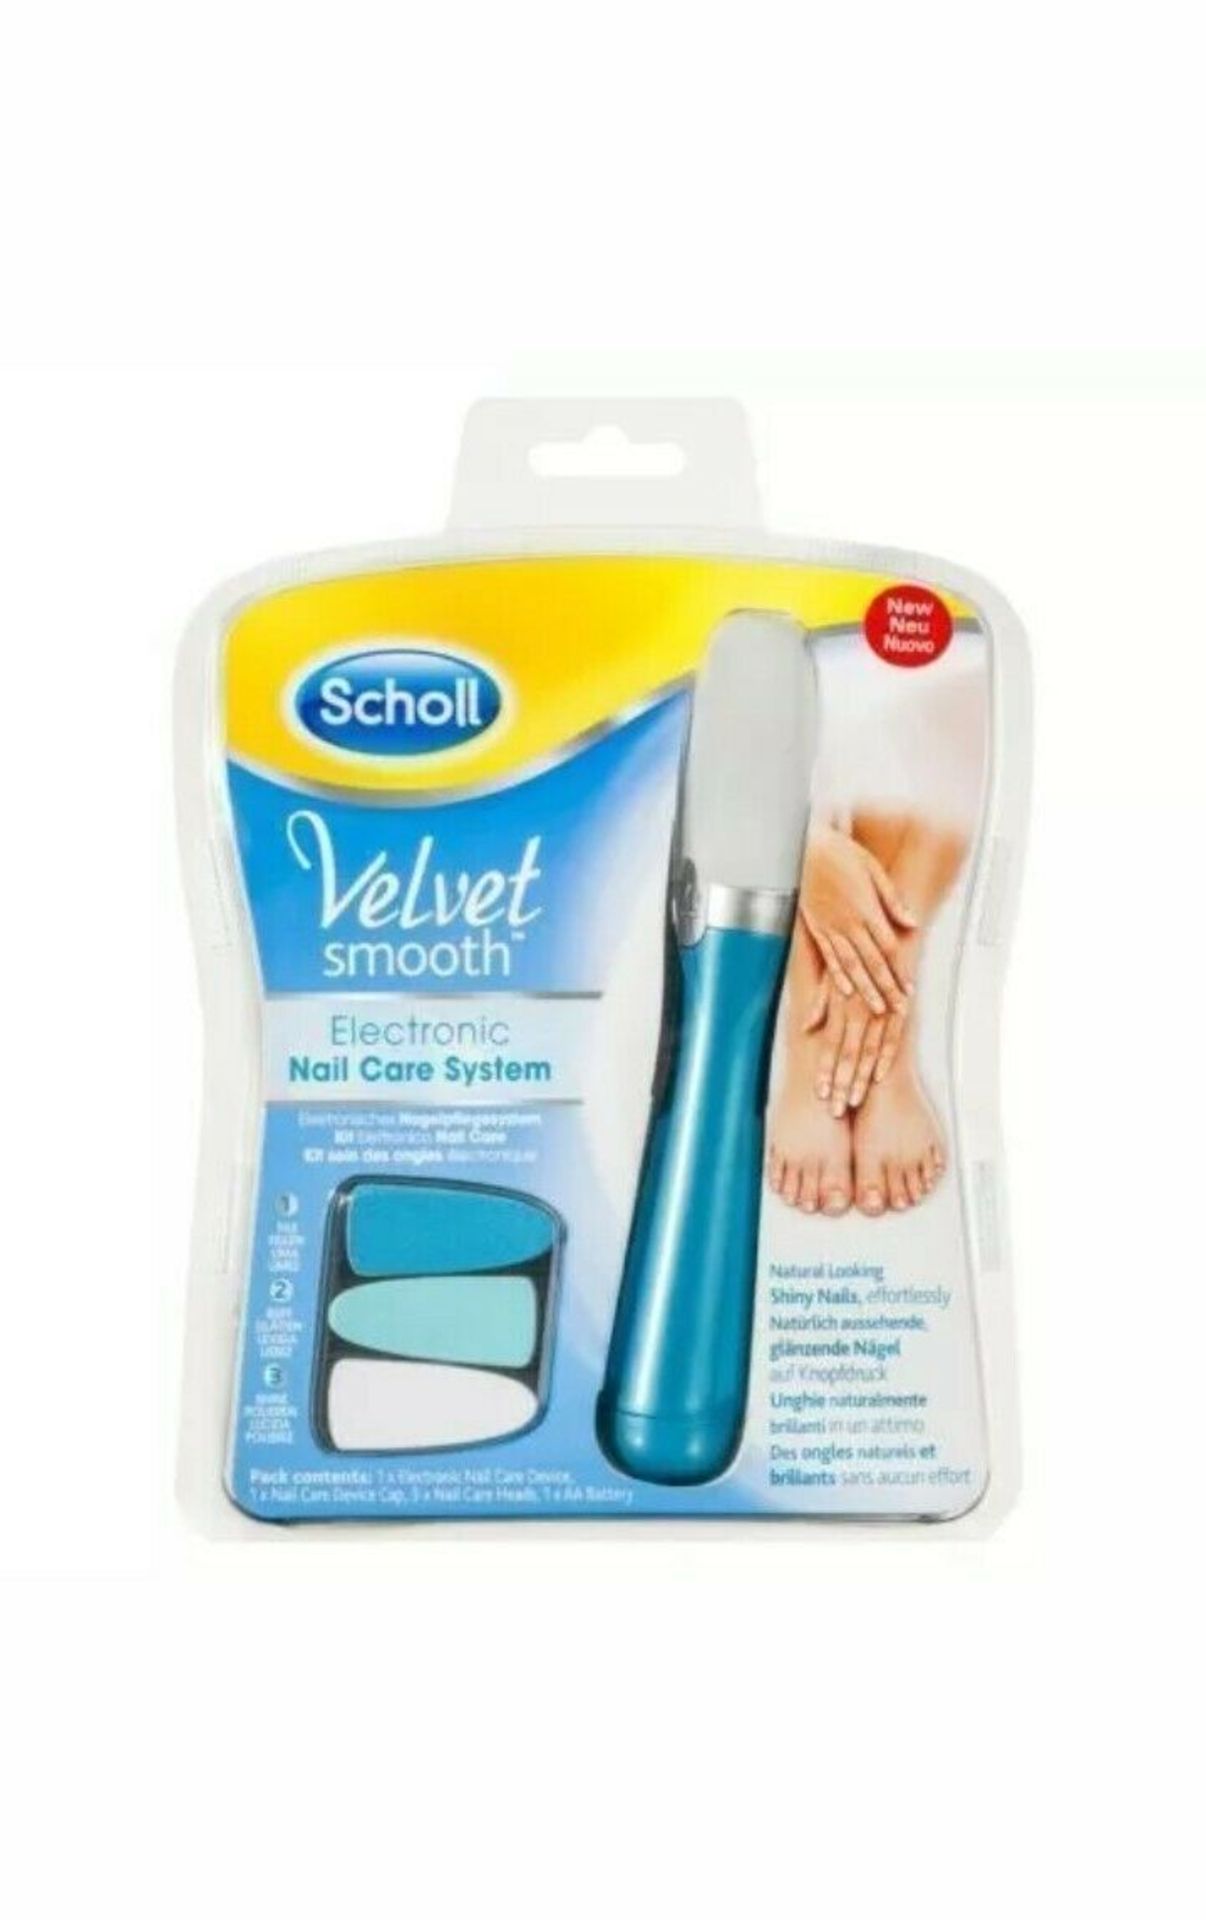 100x Brand New Scholl Nail Care System